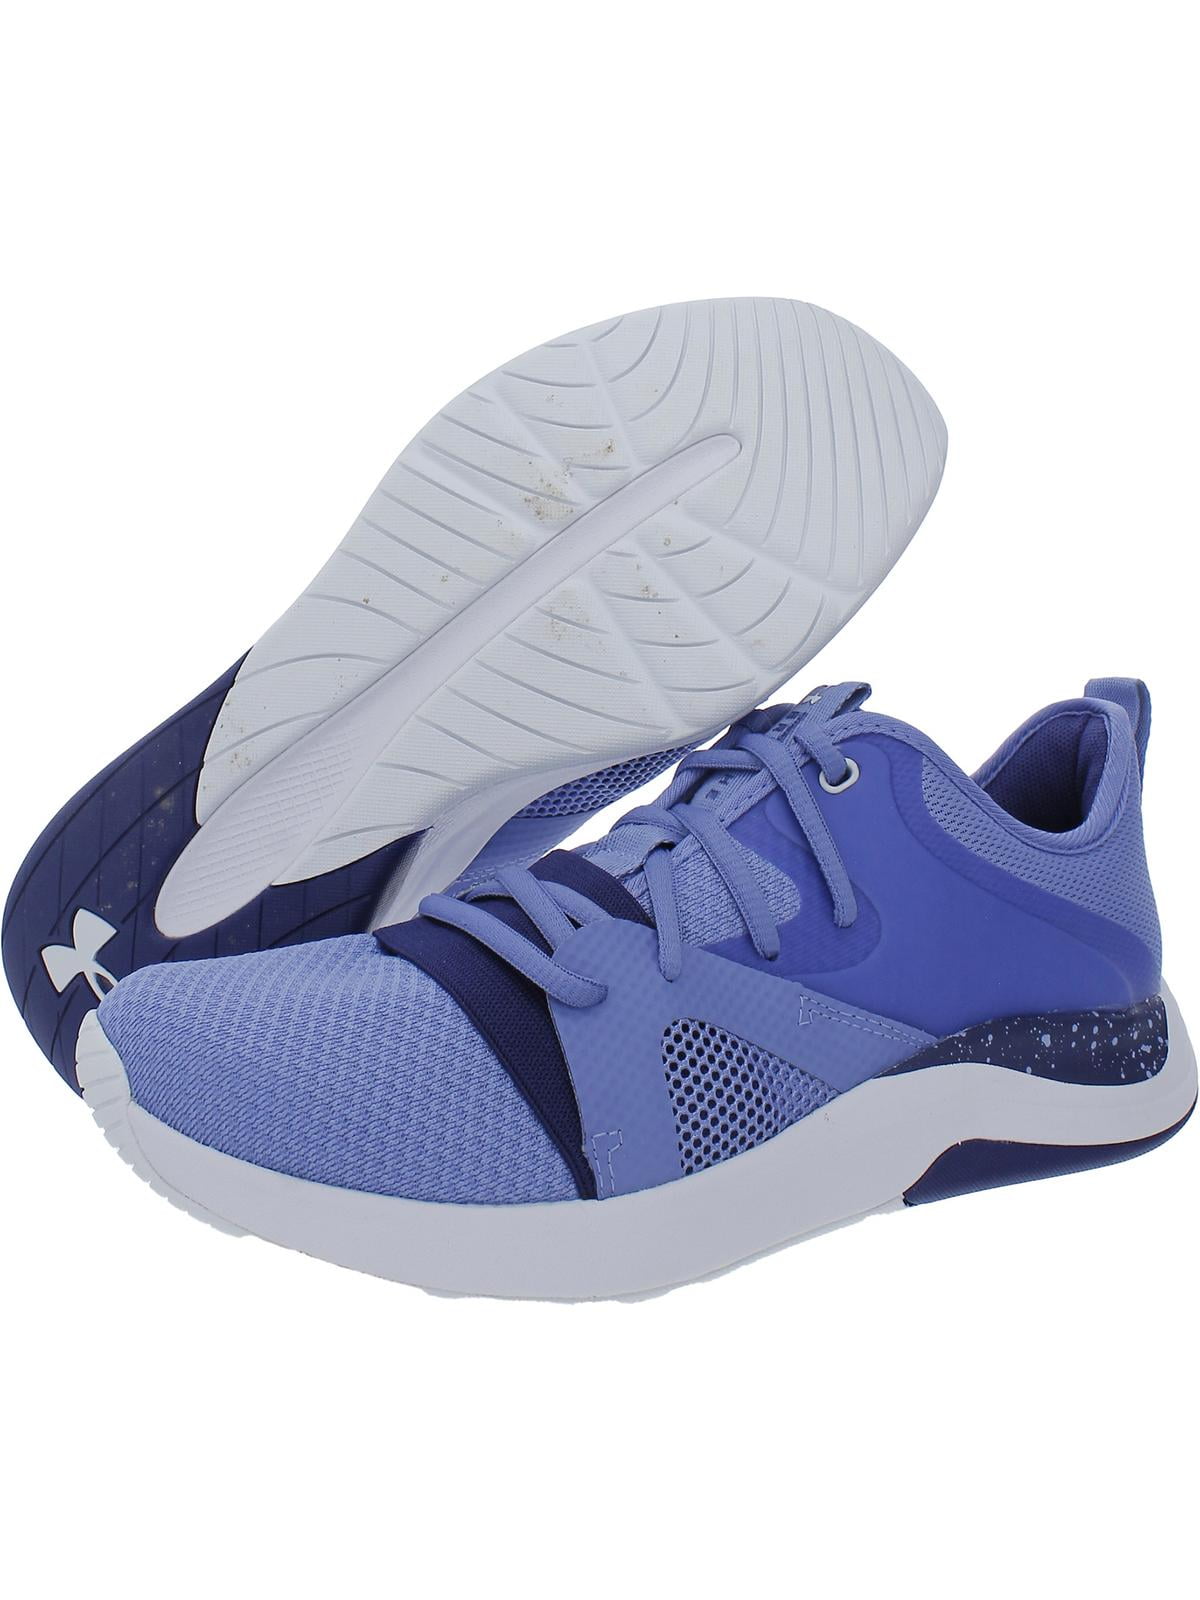 Under Armour, Armour Charged Breath Training Shoes Womens, Training Shoes